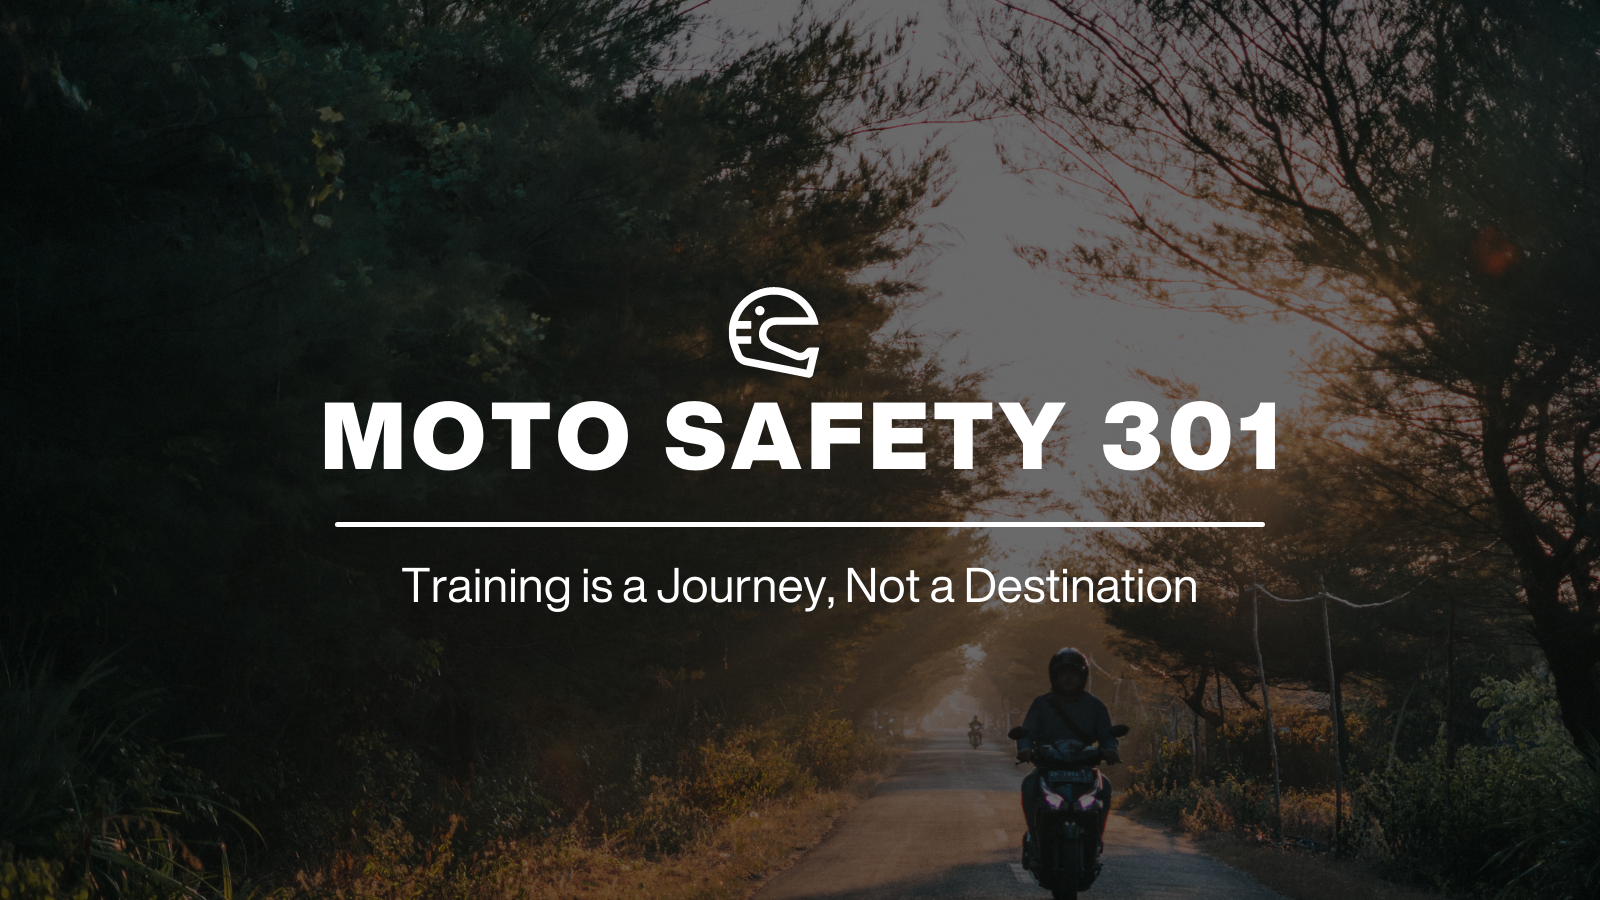 Motorcycle Safety Course 301